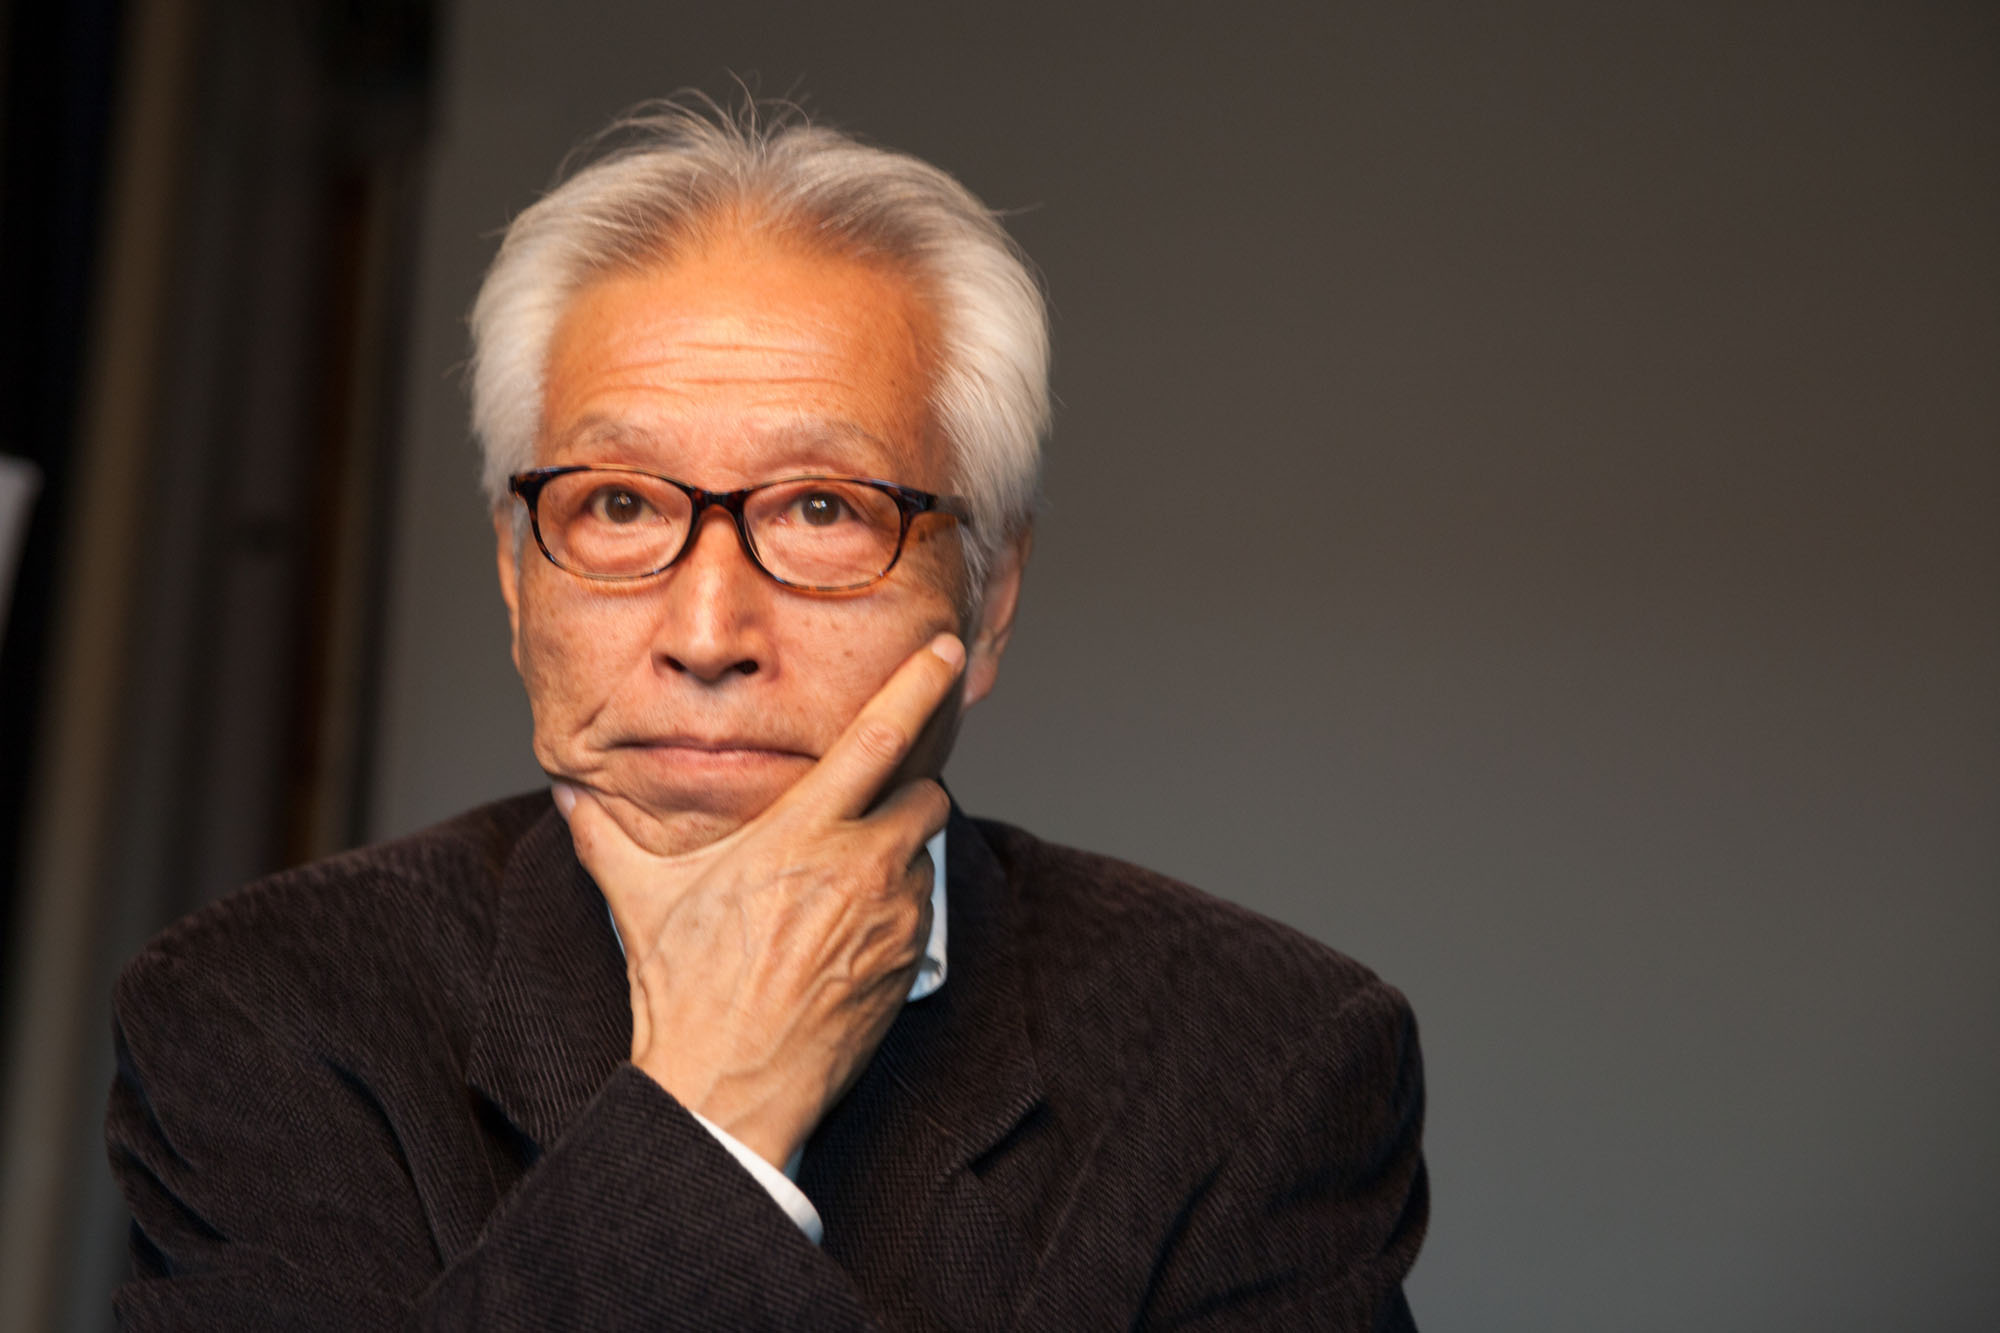 Getty Images/iStockphotoIn defense of the older Japanese man image